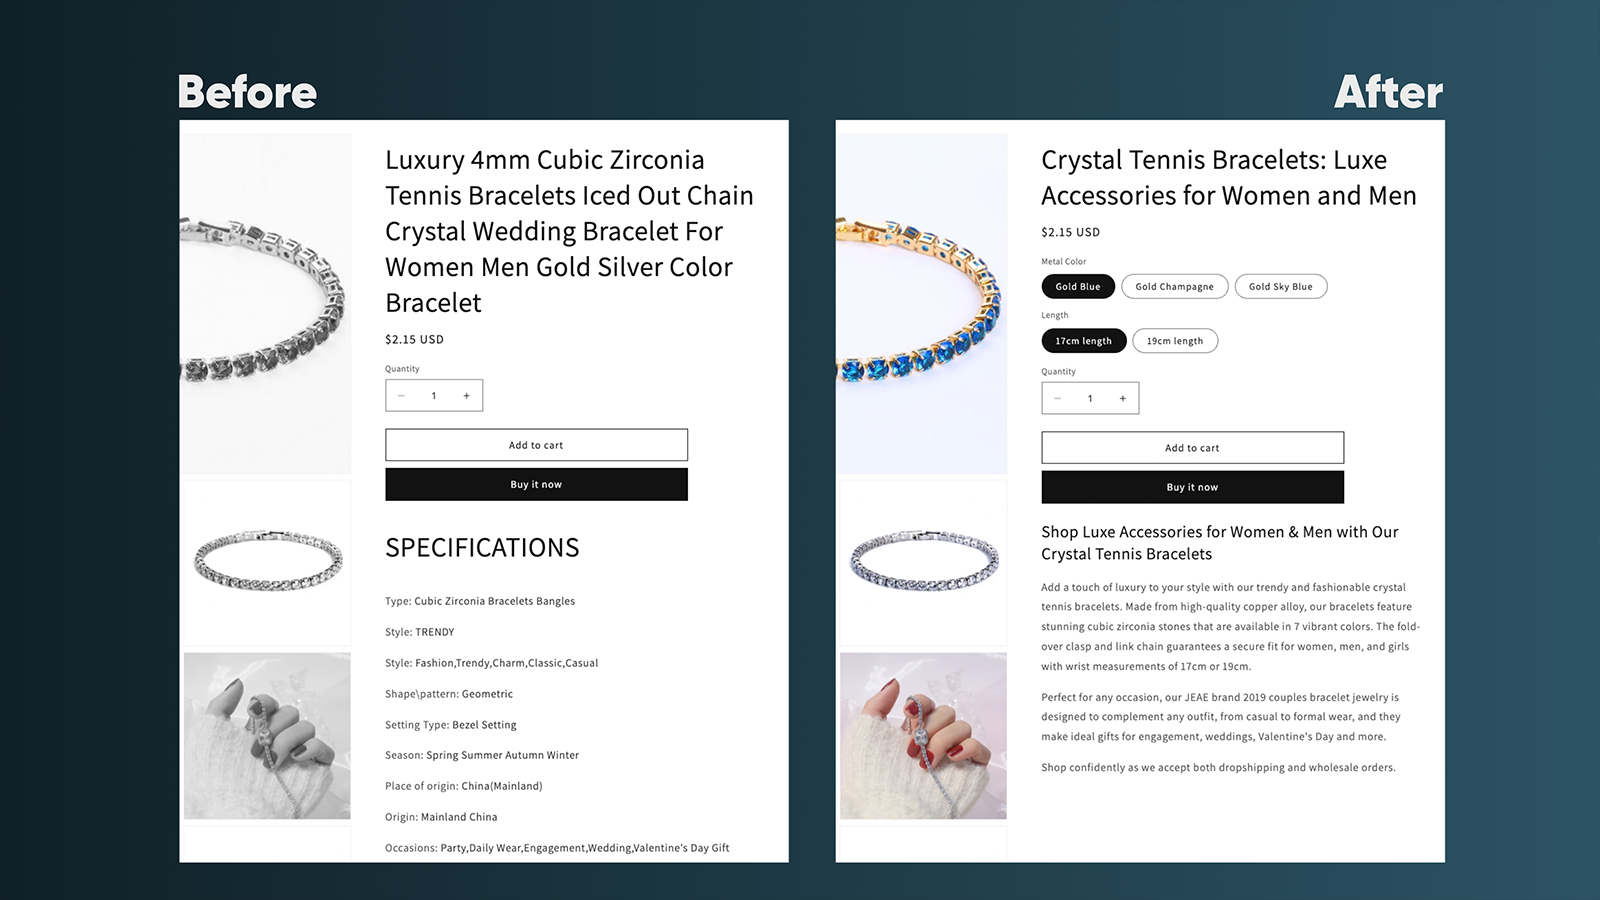 Transform your product titles and descriptions